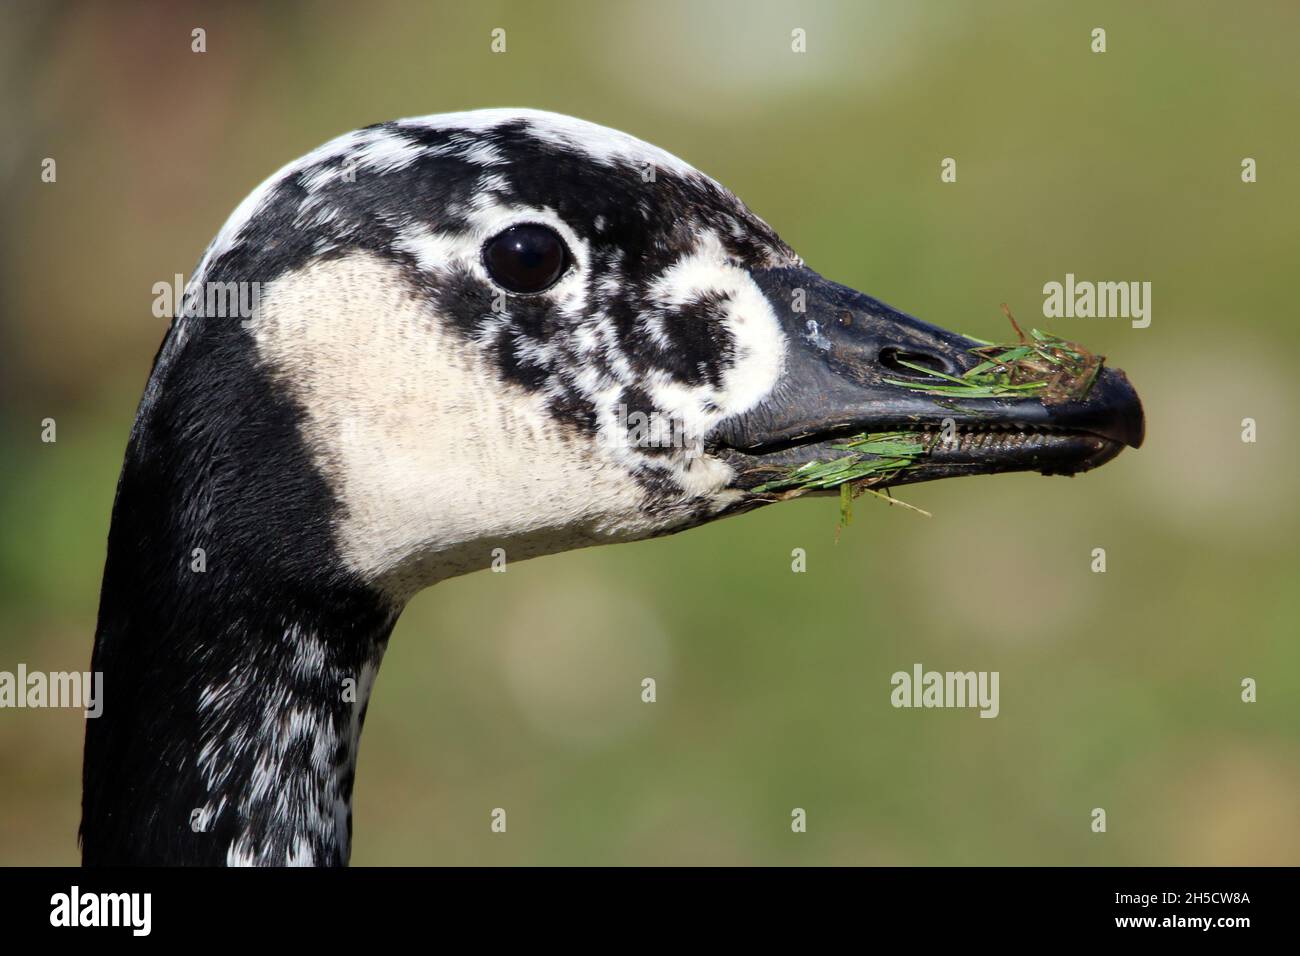 Canada goose (Branta canadensis), Portait of a hybrid, Germany Stock Photo